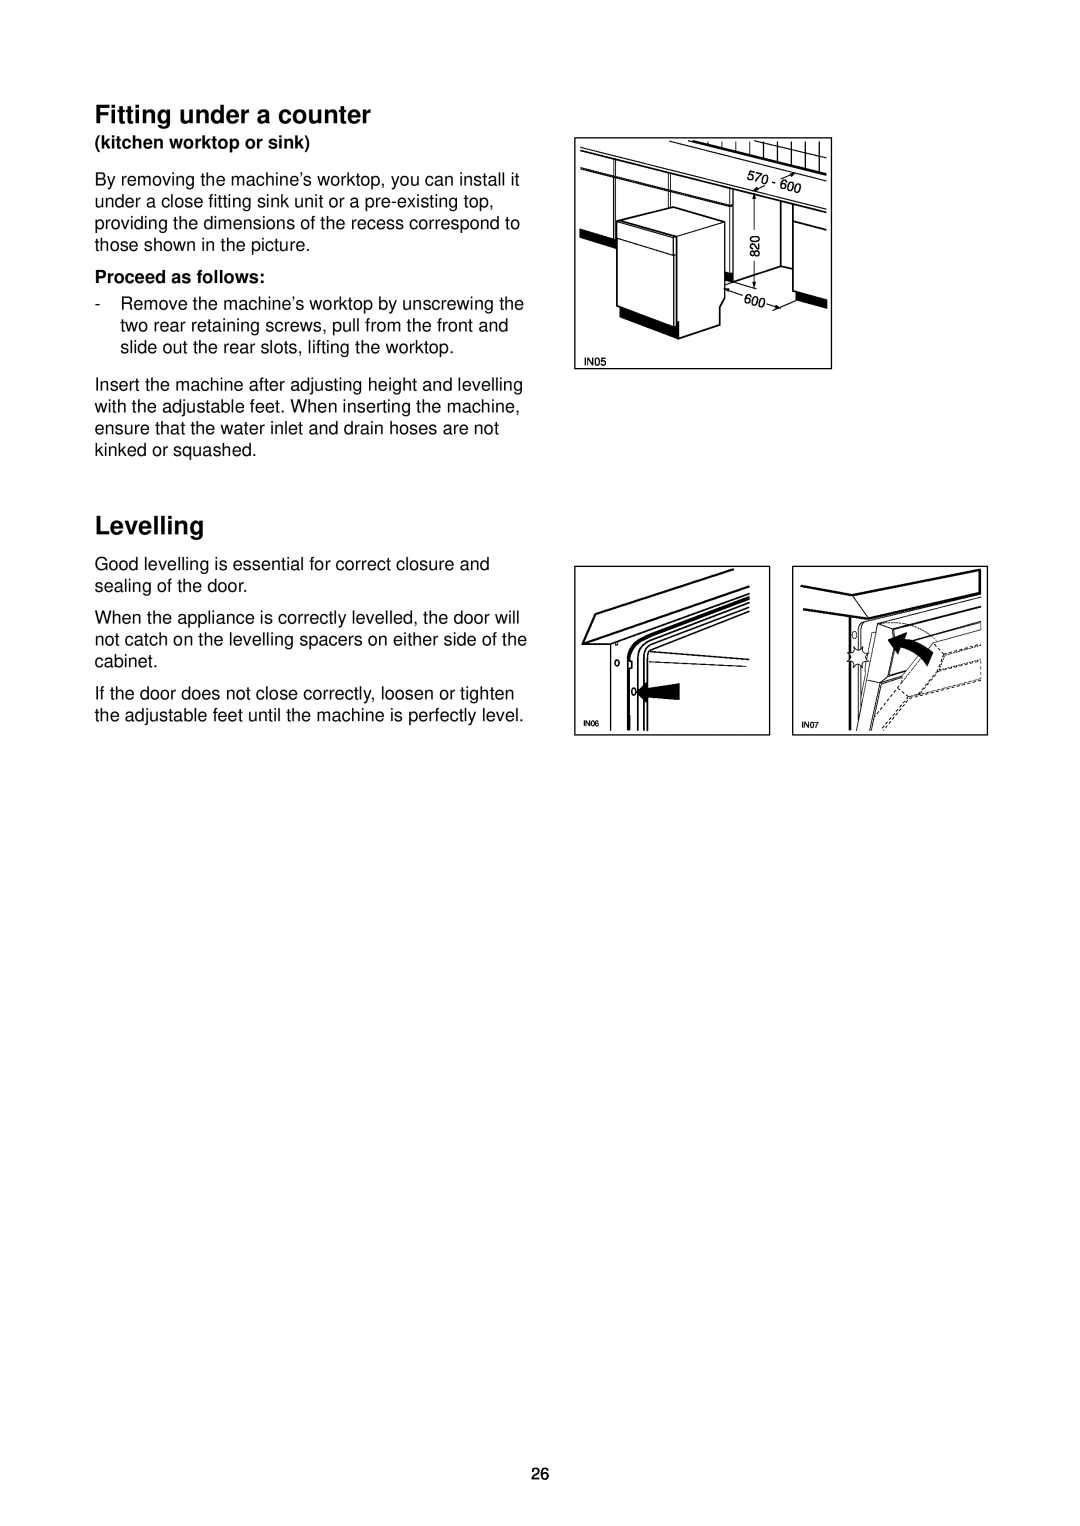 Zanussi DE 6965 manual Fitting under a counter, Levelling, kitchen worktop or sink, Proceed as follows, IN05 